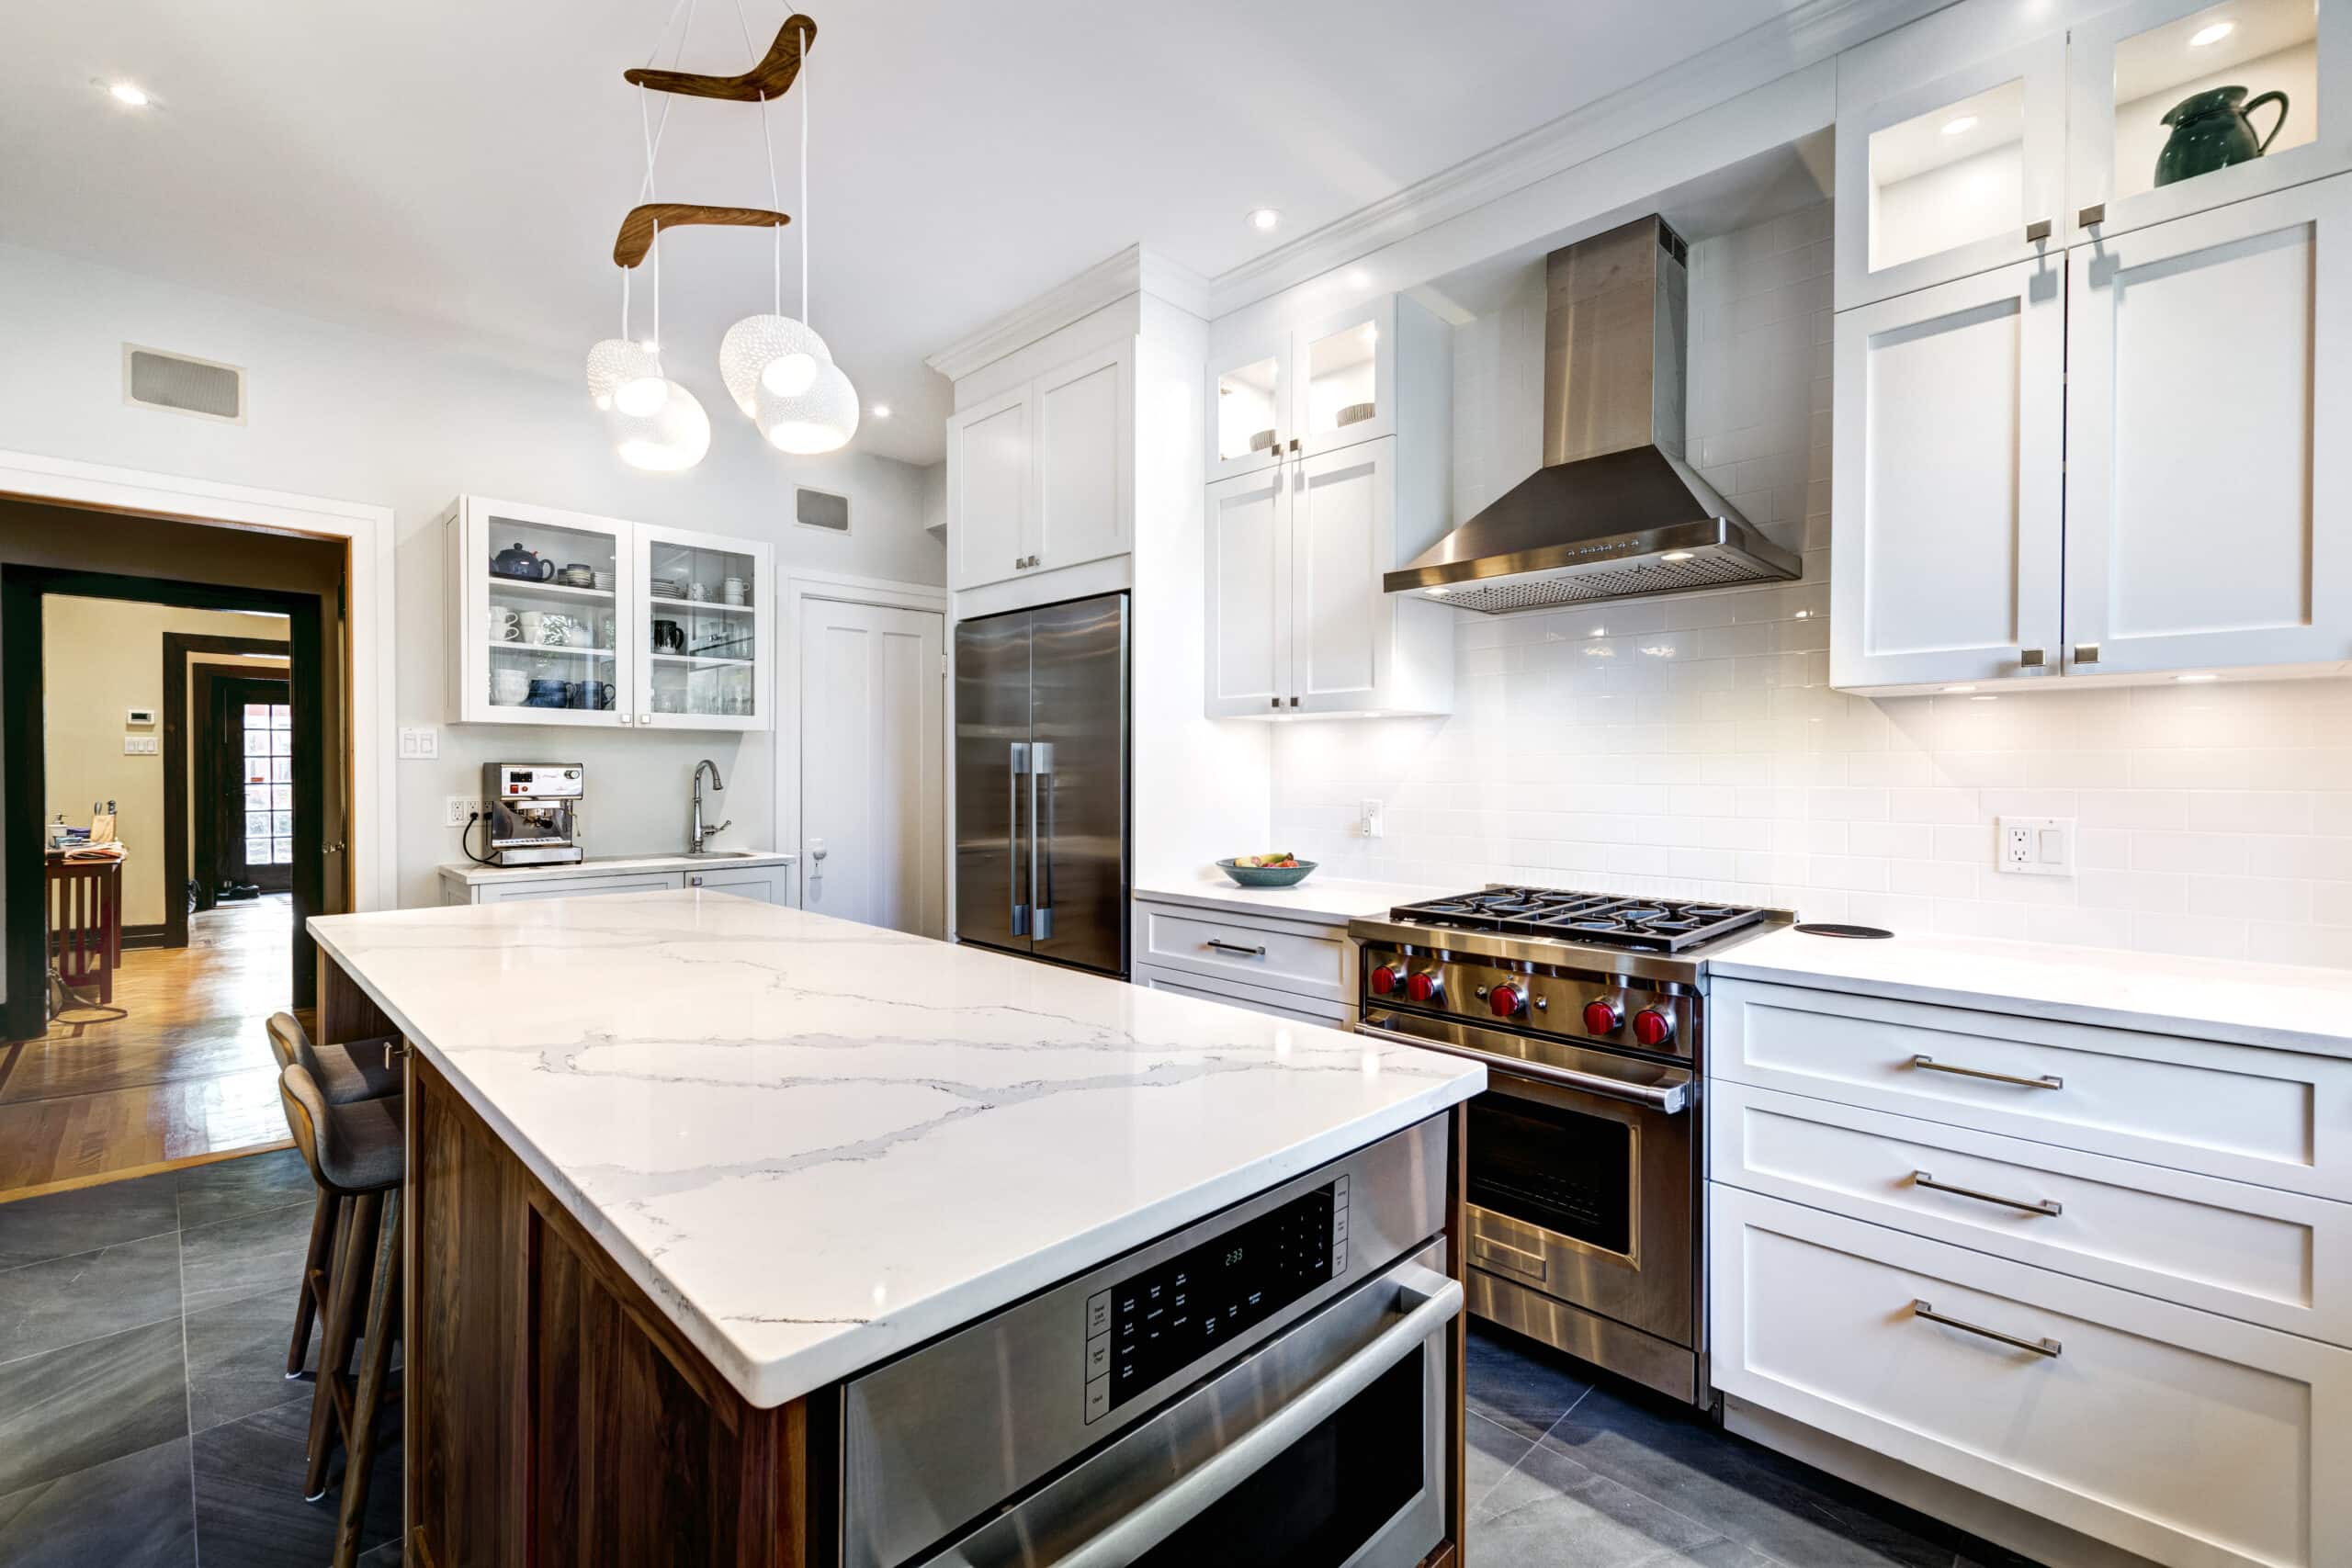 Luxury white kitchen with shaker cabinet and quartz countertop